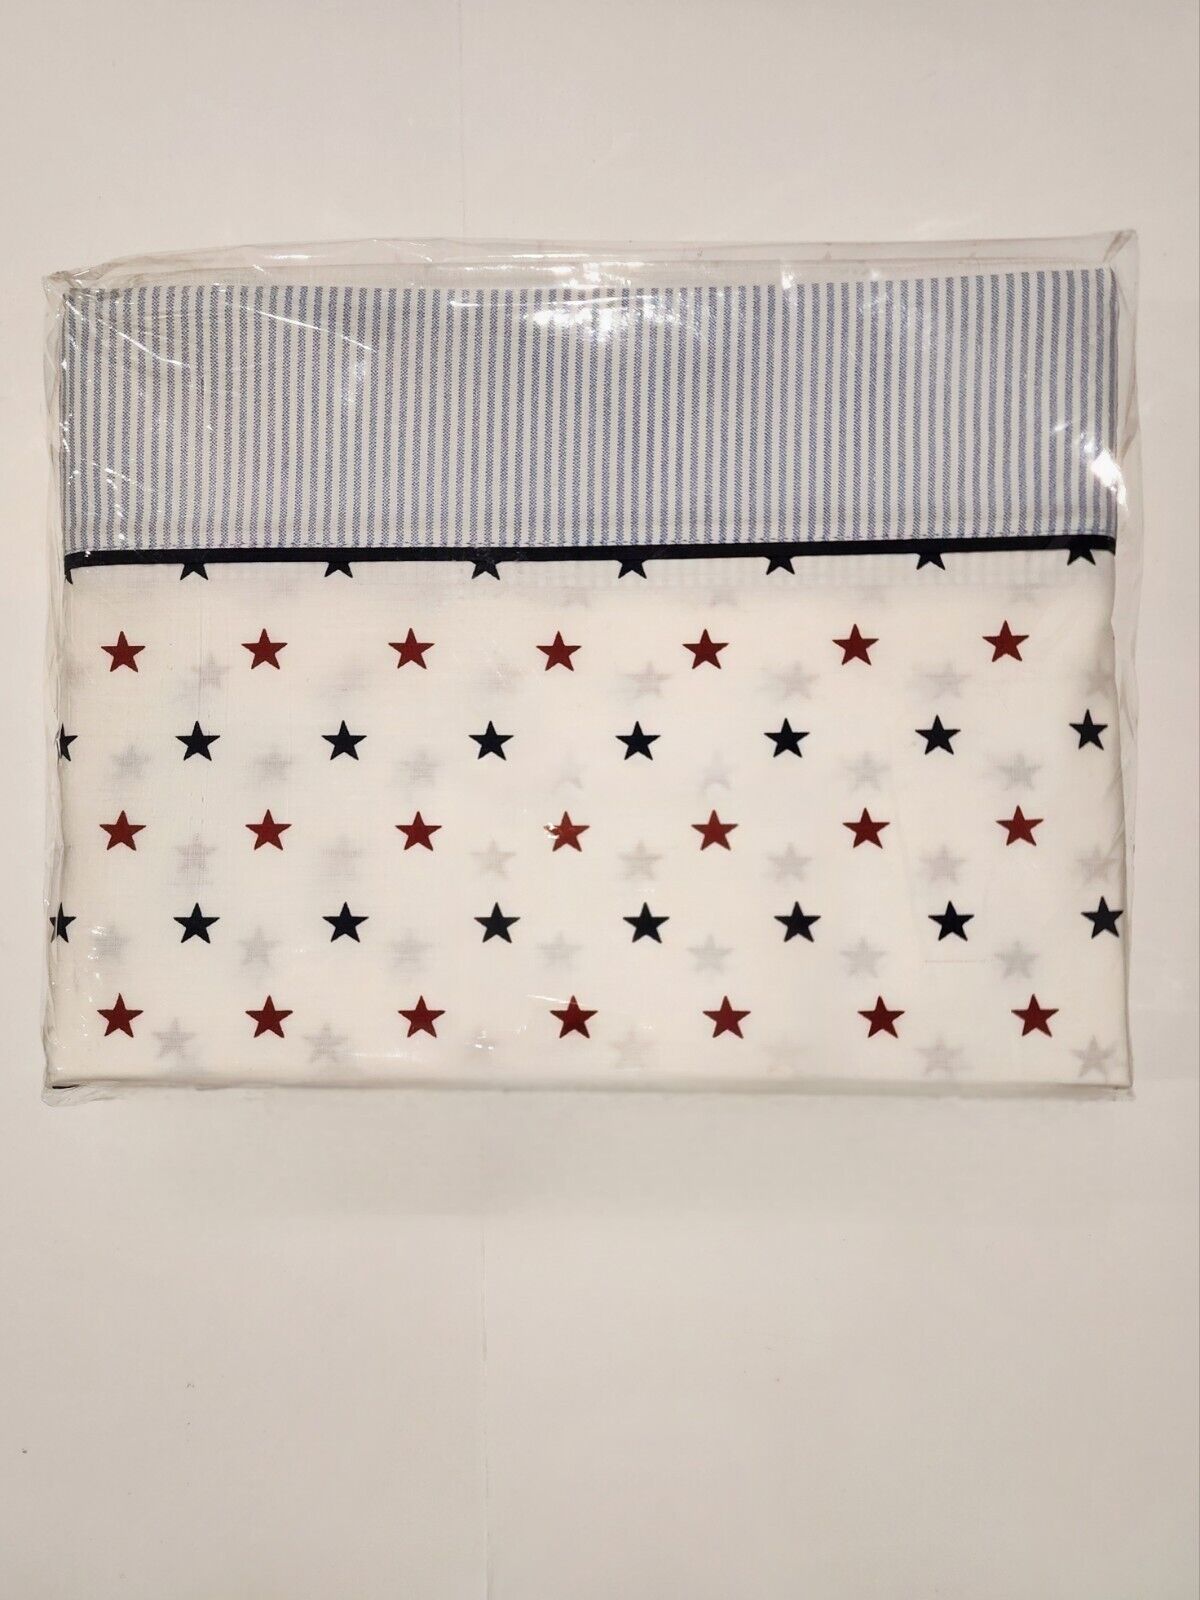 TOMMY HILFIGER Twin Flat Sheet Union Stars And Stripes Red White Blue. NWOT 